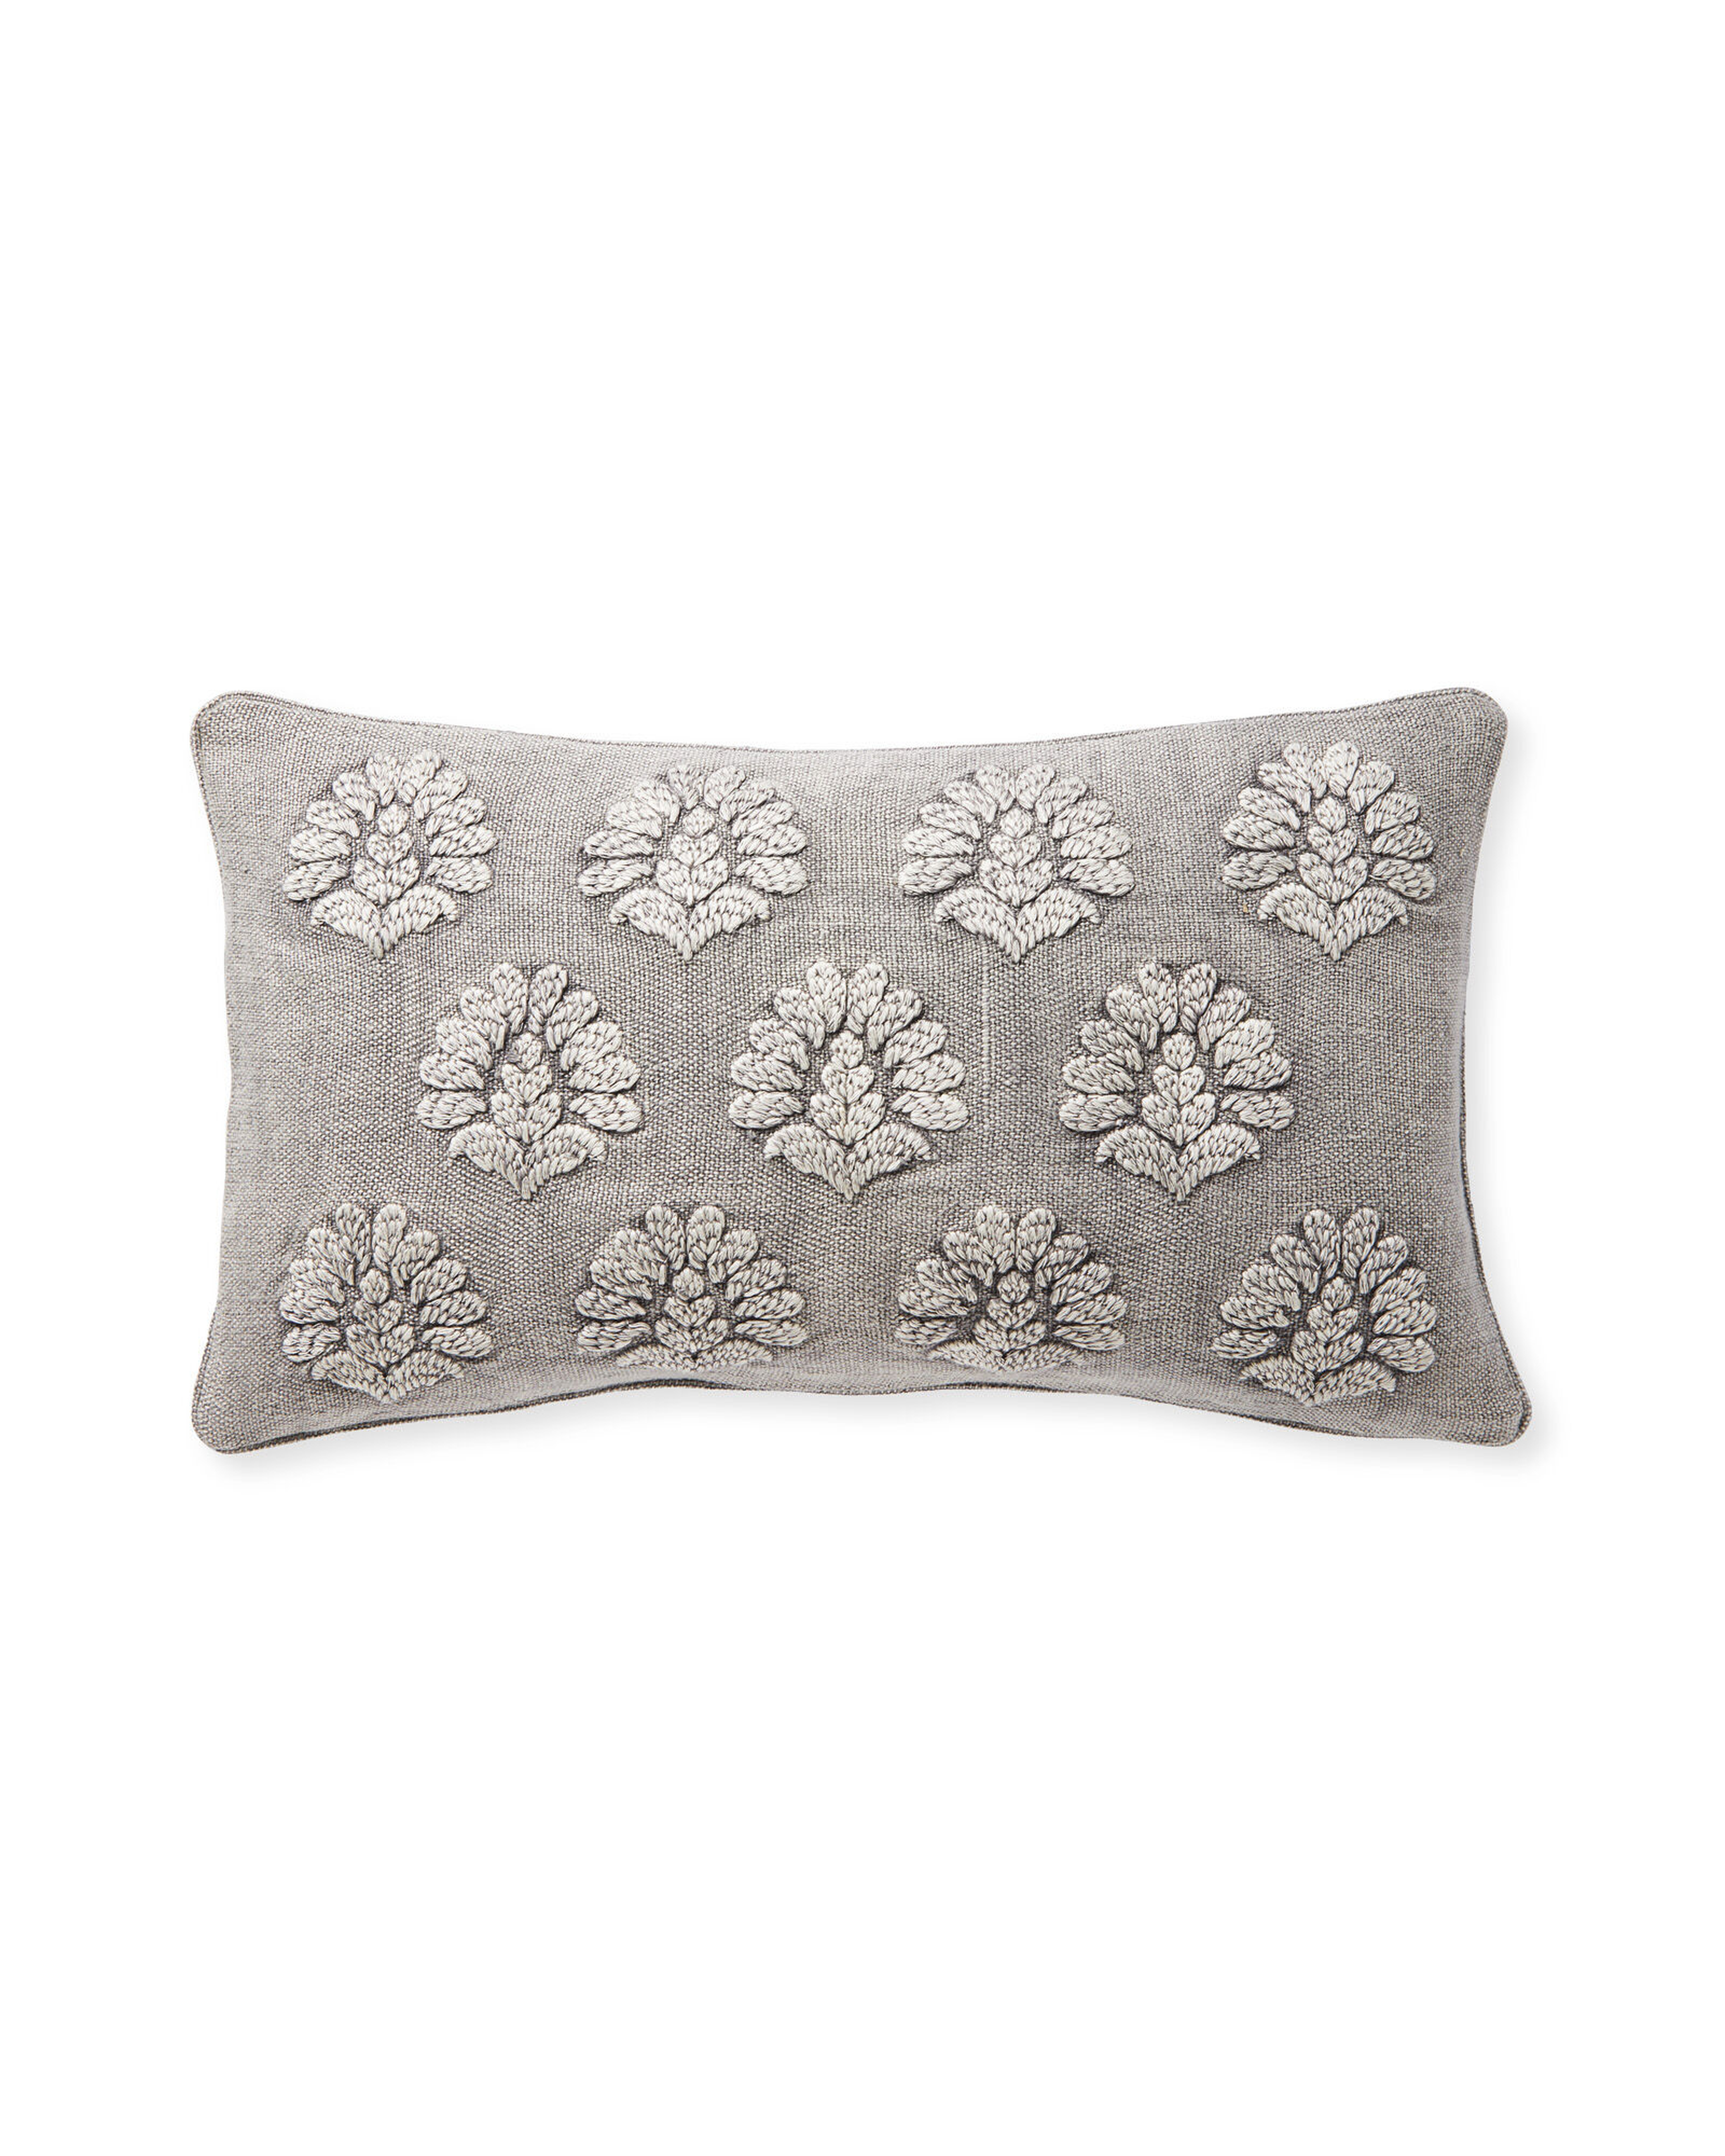 Miramonte Pillow Cover - Serena and Lily